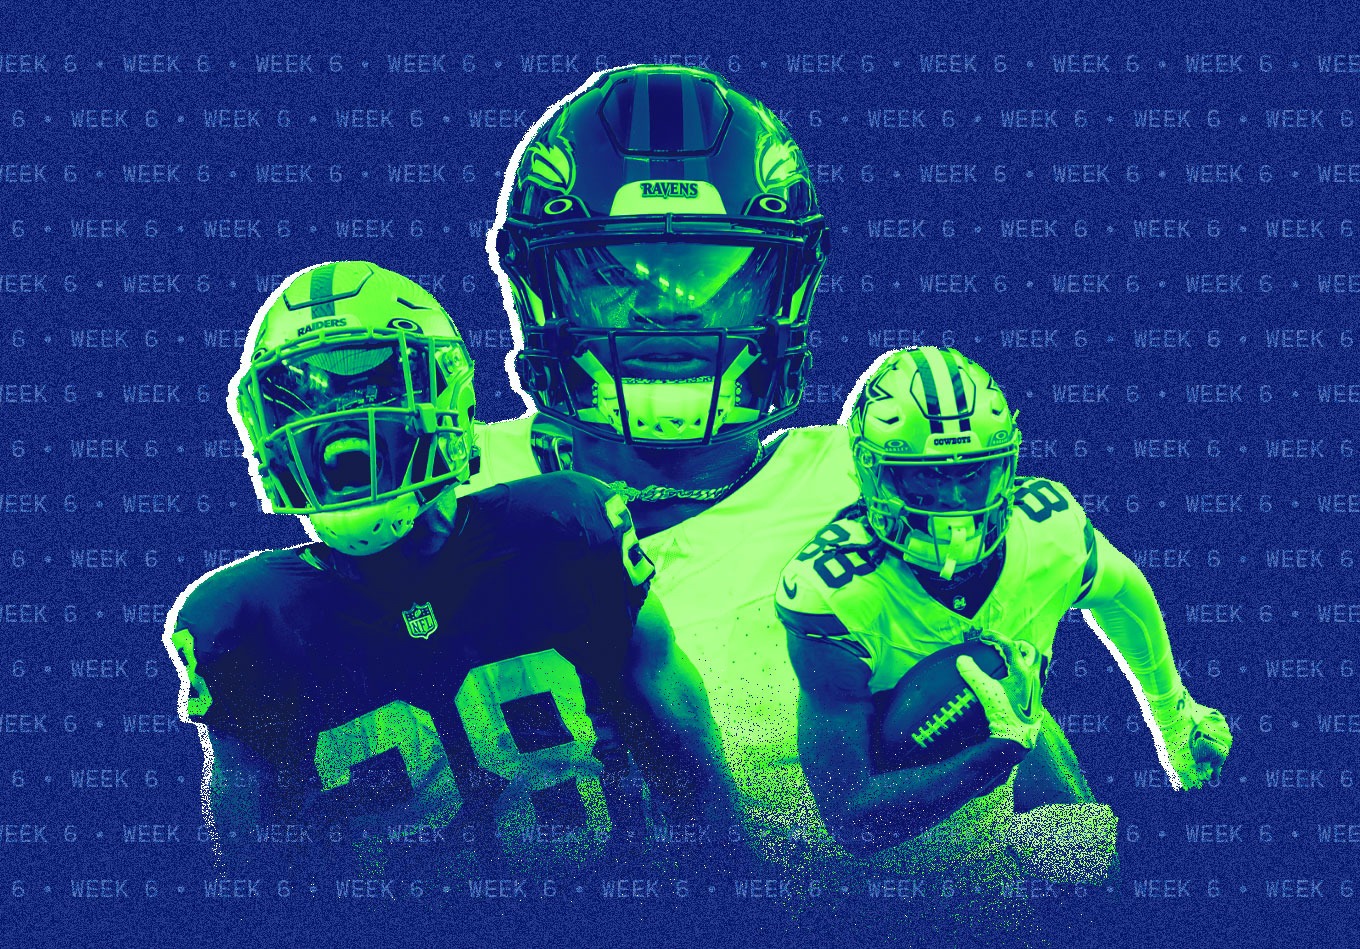 Fantasy Football wide receiver rankings 2022: Early expert